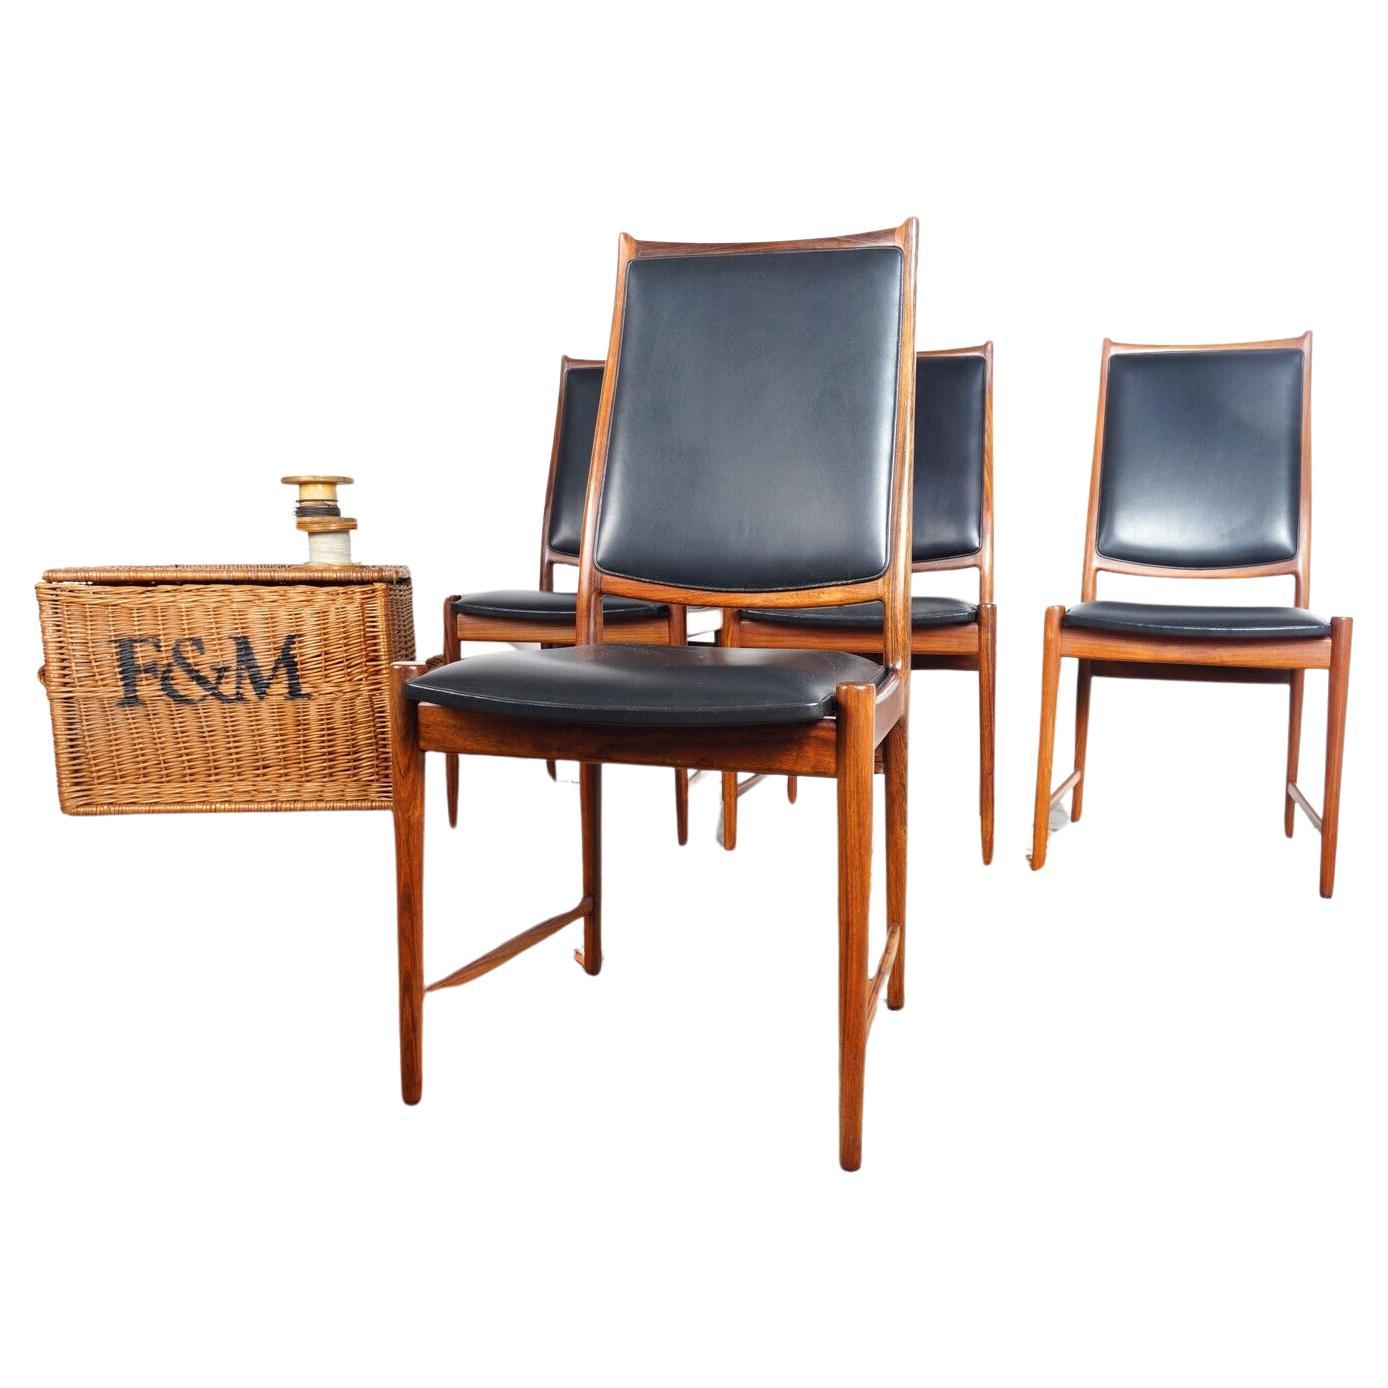 Set of Four Norwegian 60s 'Darby' Dining Chairs Designed by Torbjörn Afdal for Bruksbo

A set of four Norwegian sculpted Danish design Rosewood 'Darby' dining chairs, 
designed by Torbjörn Afdal for Bruksbo in the 1960s.

The rosewood's dark